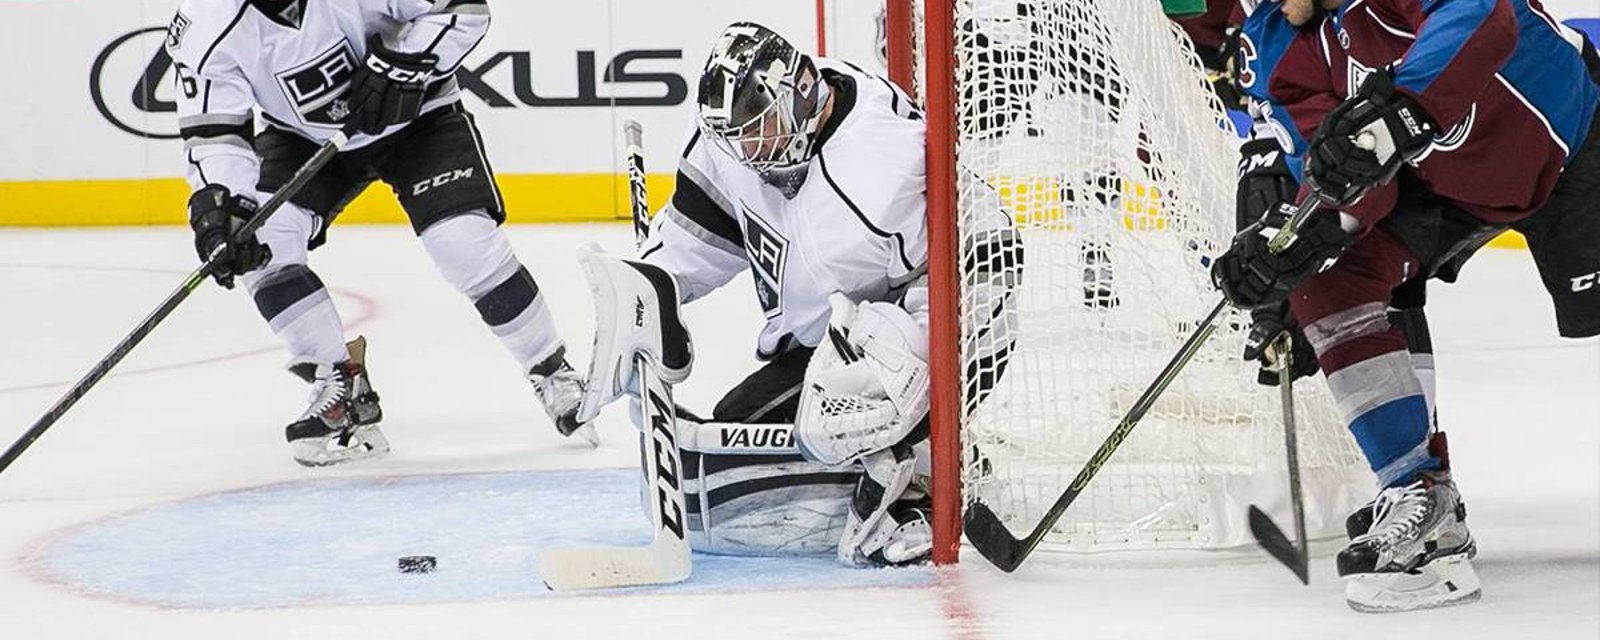 Breaking: Kings cut former first round pick, place him on waivers